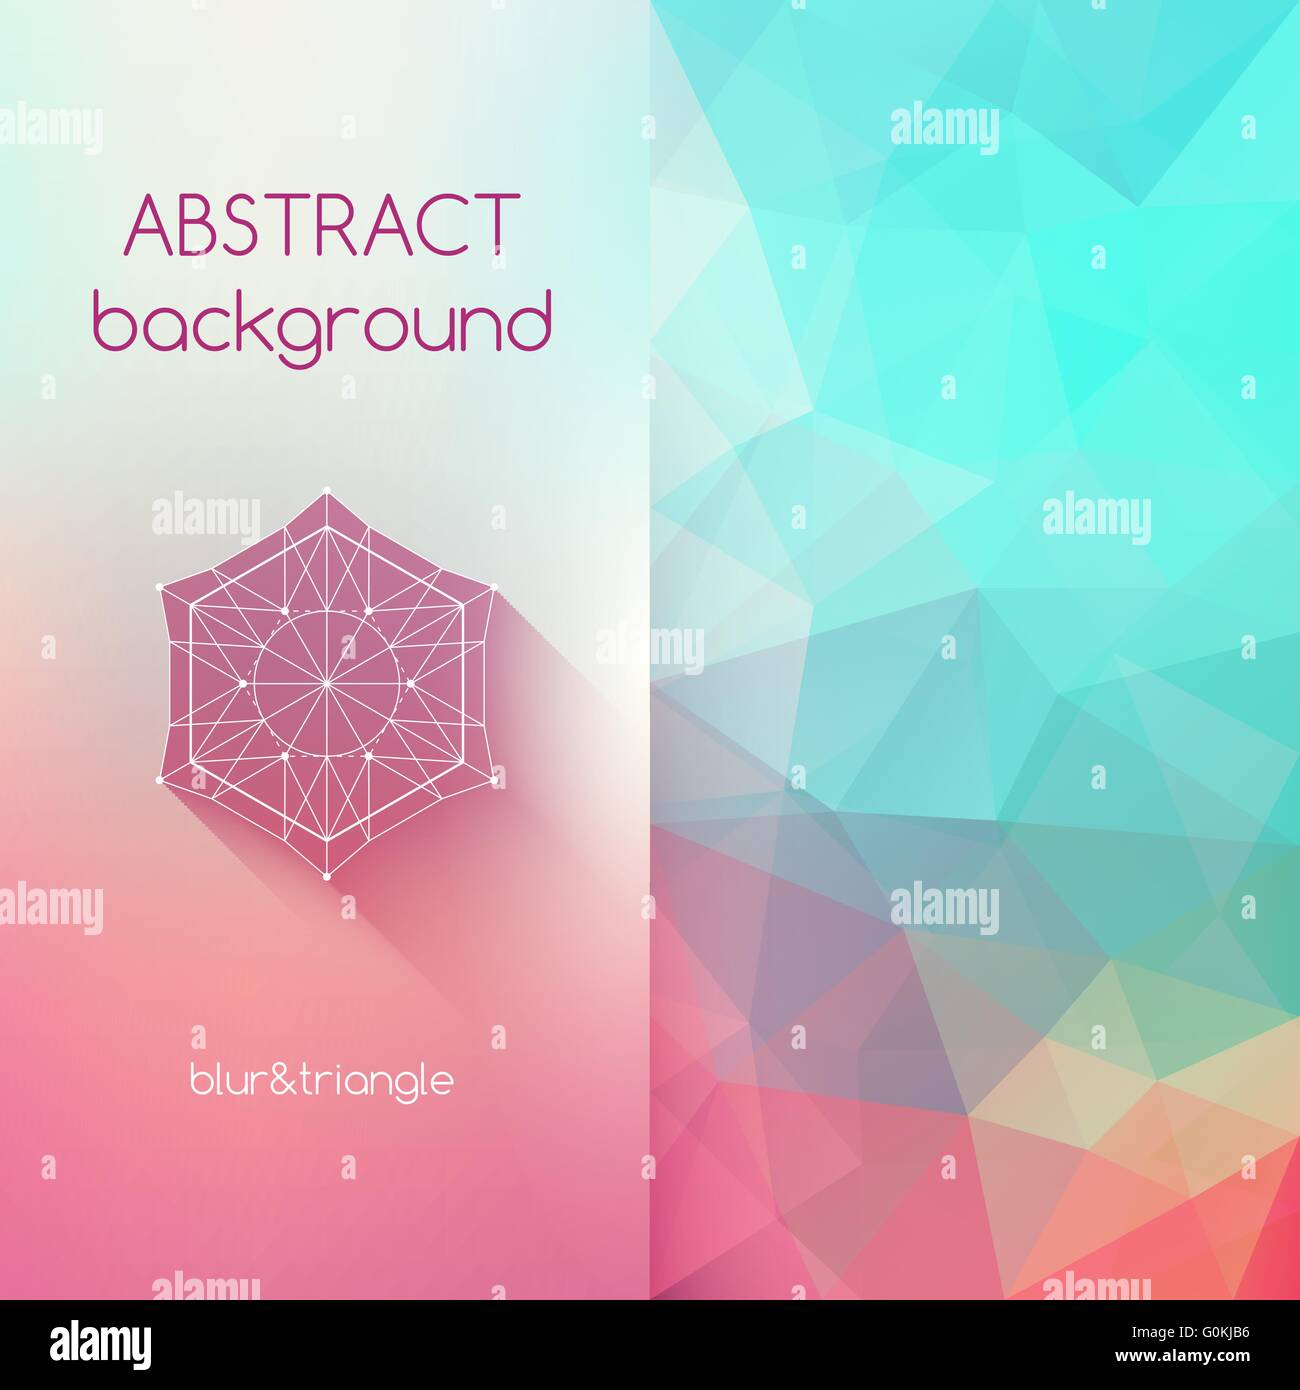 Vector square polygonal and blurred background Stock Vector